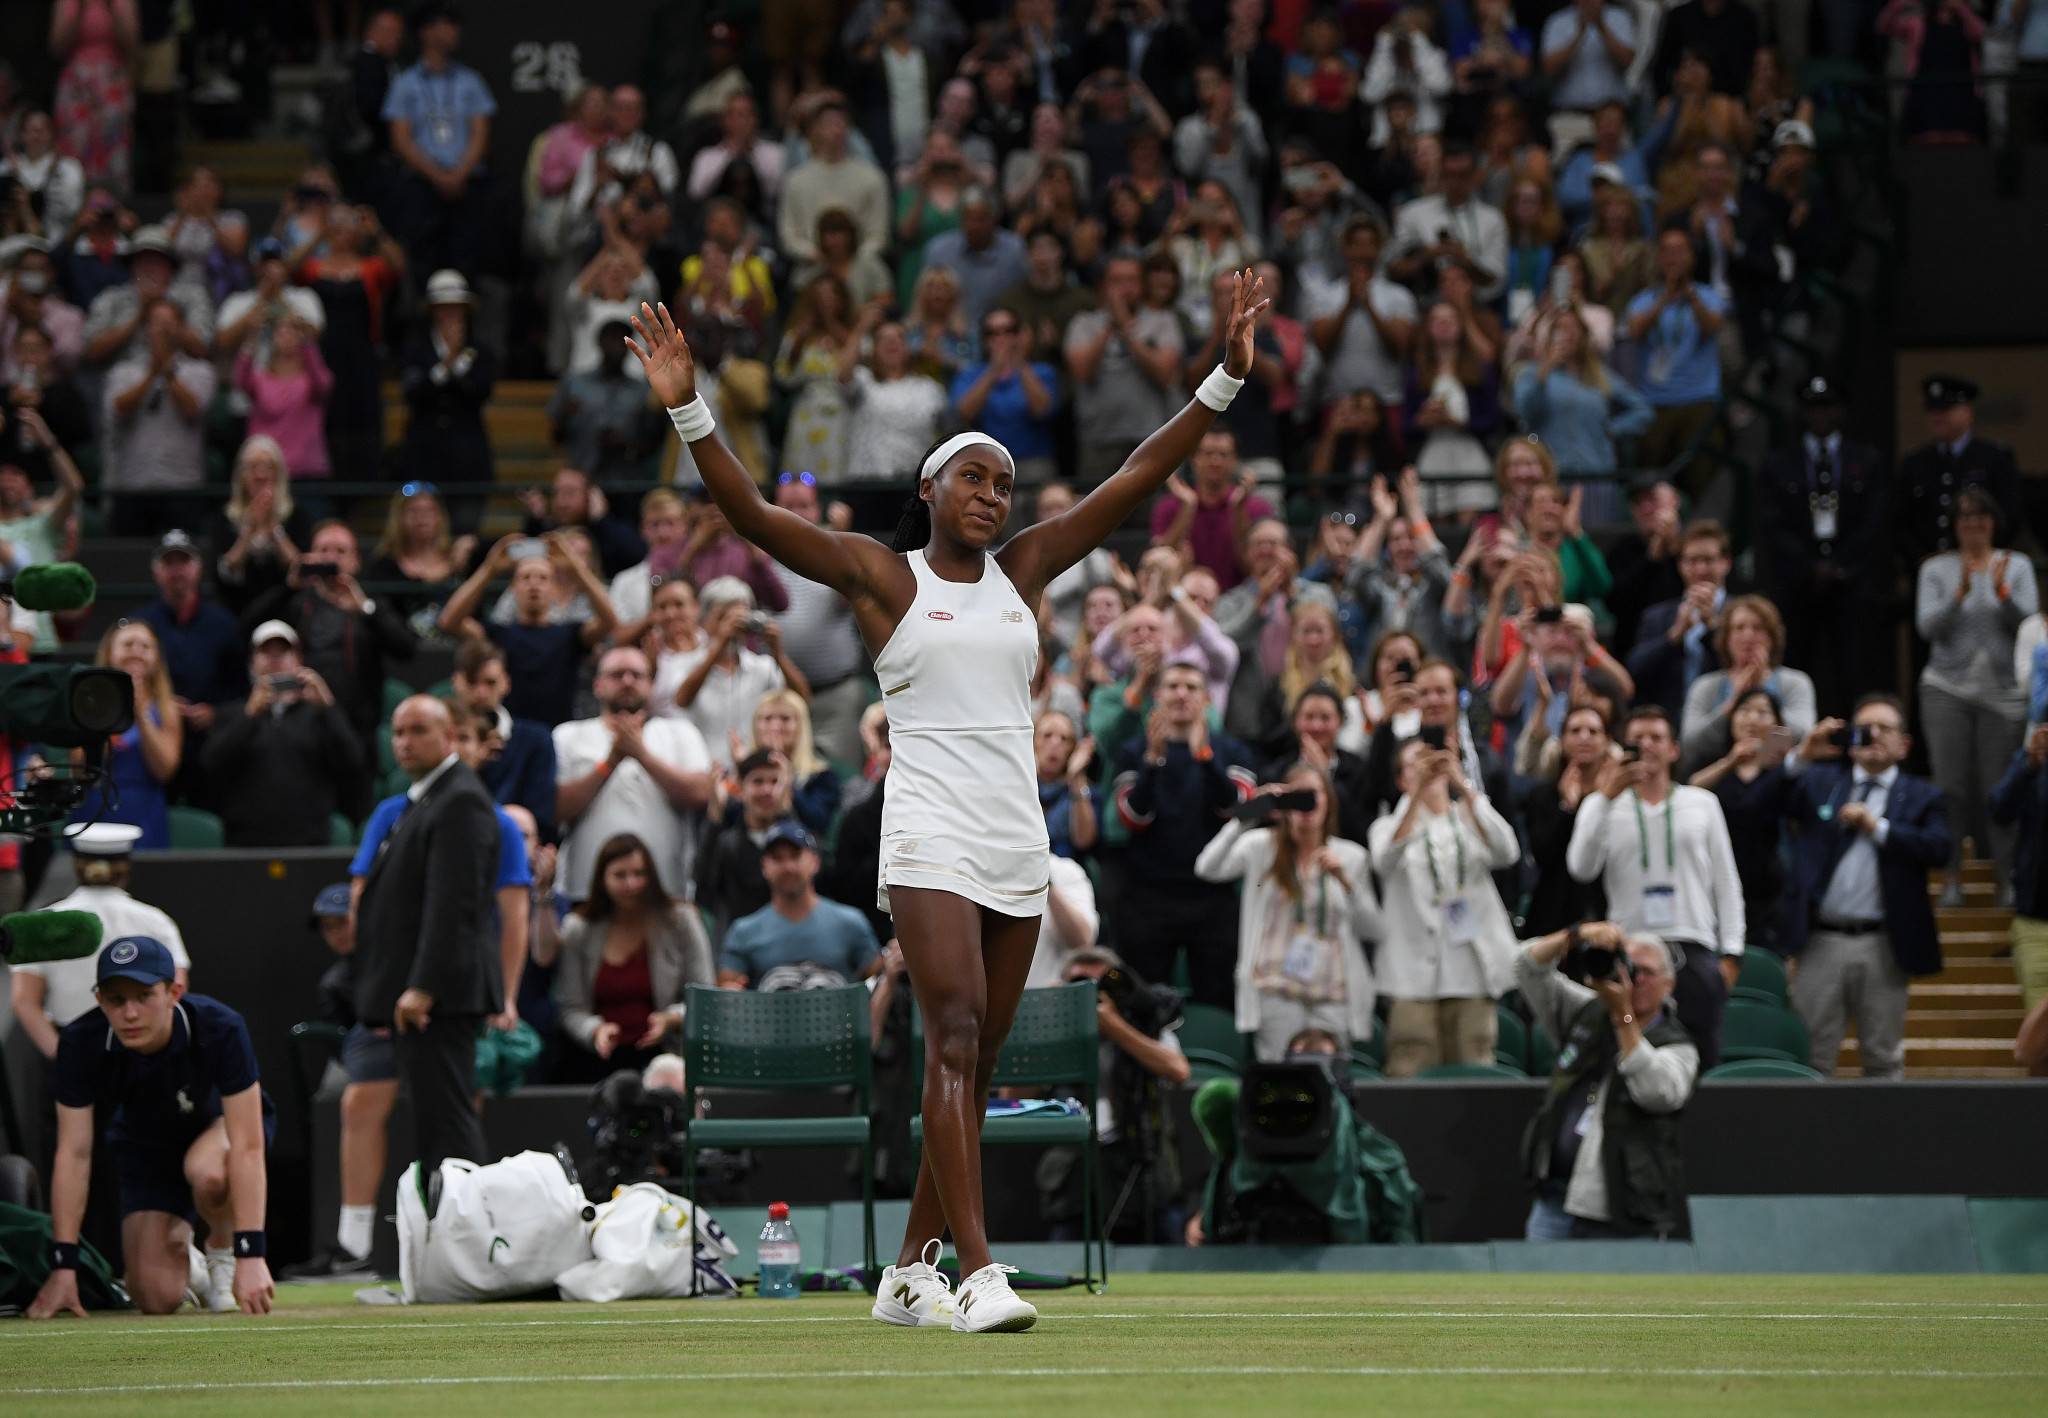 Teenager Coco Gauff celebrated another memorable victory at Wimbledon ©Getty Images